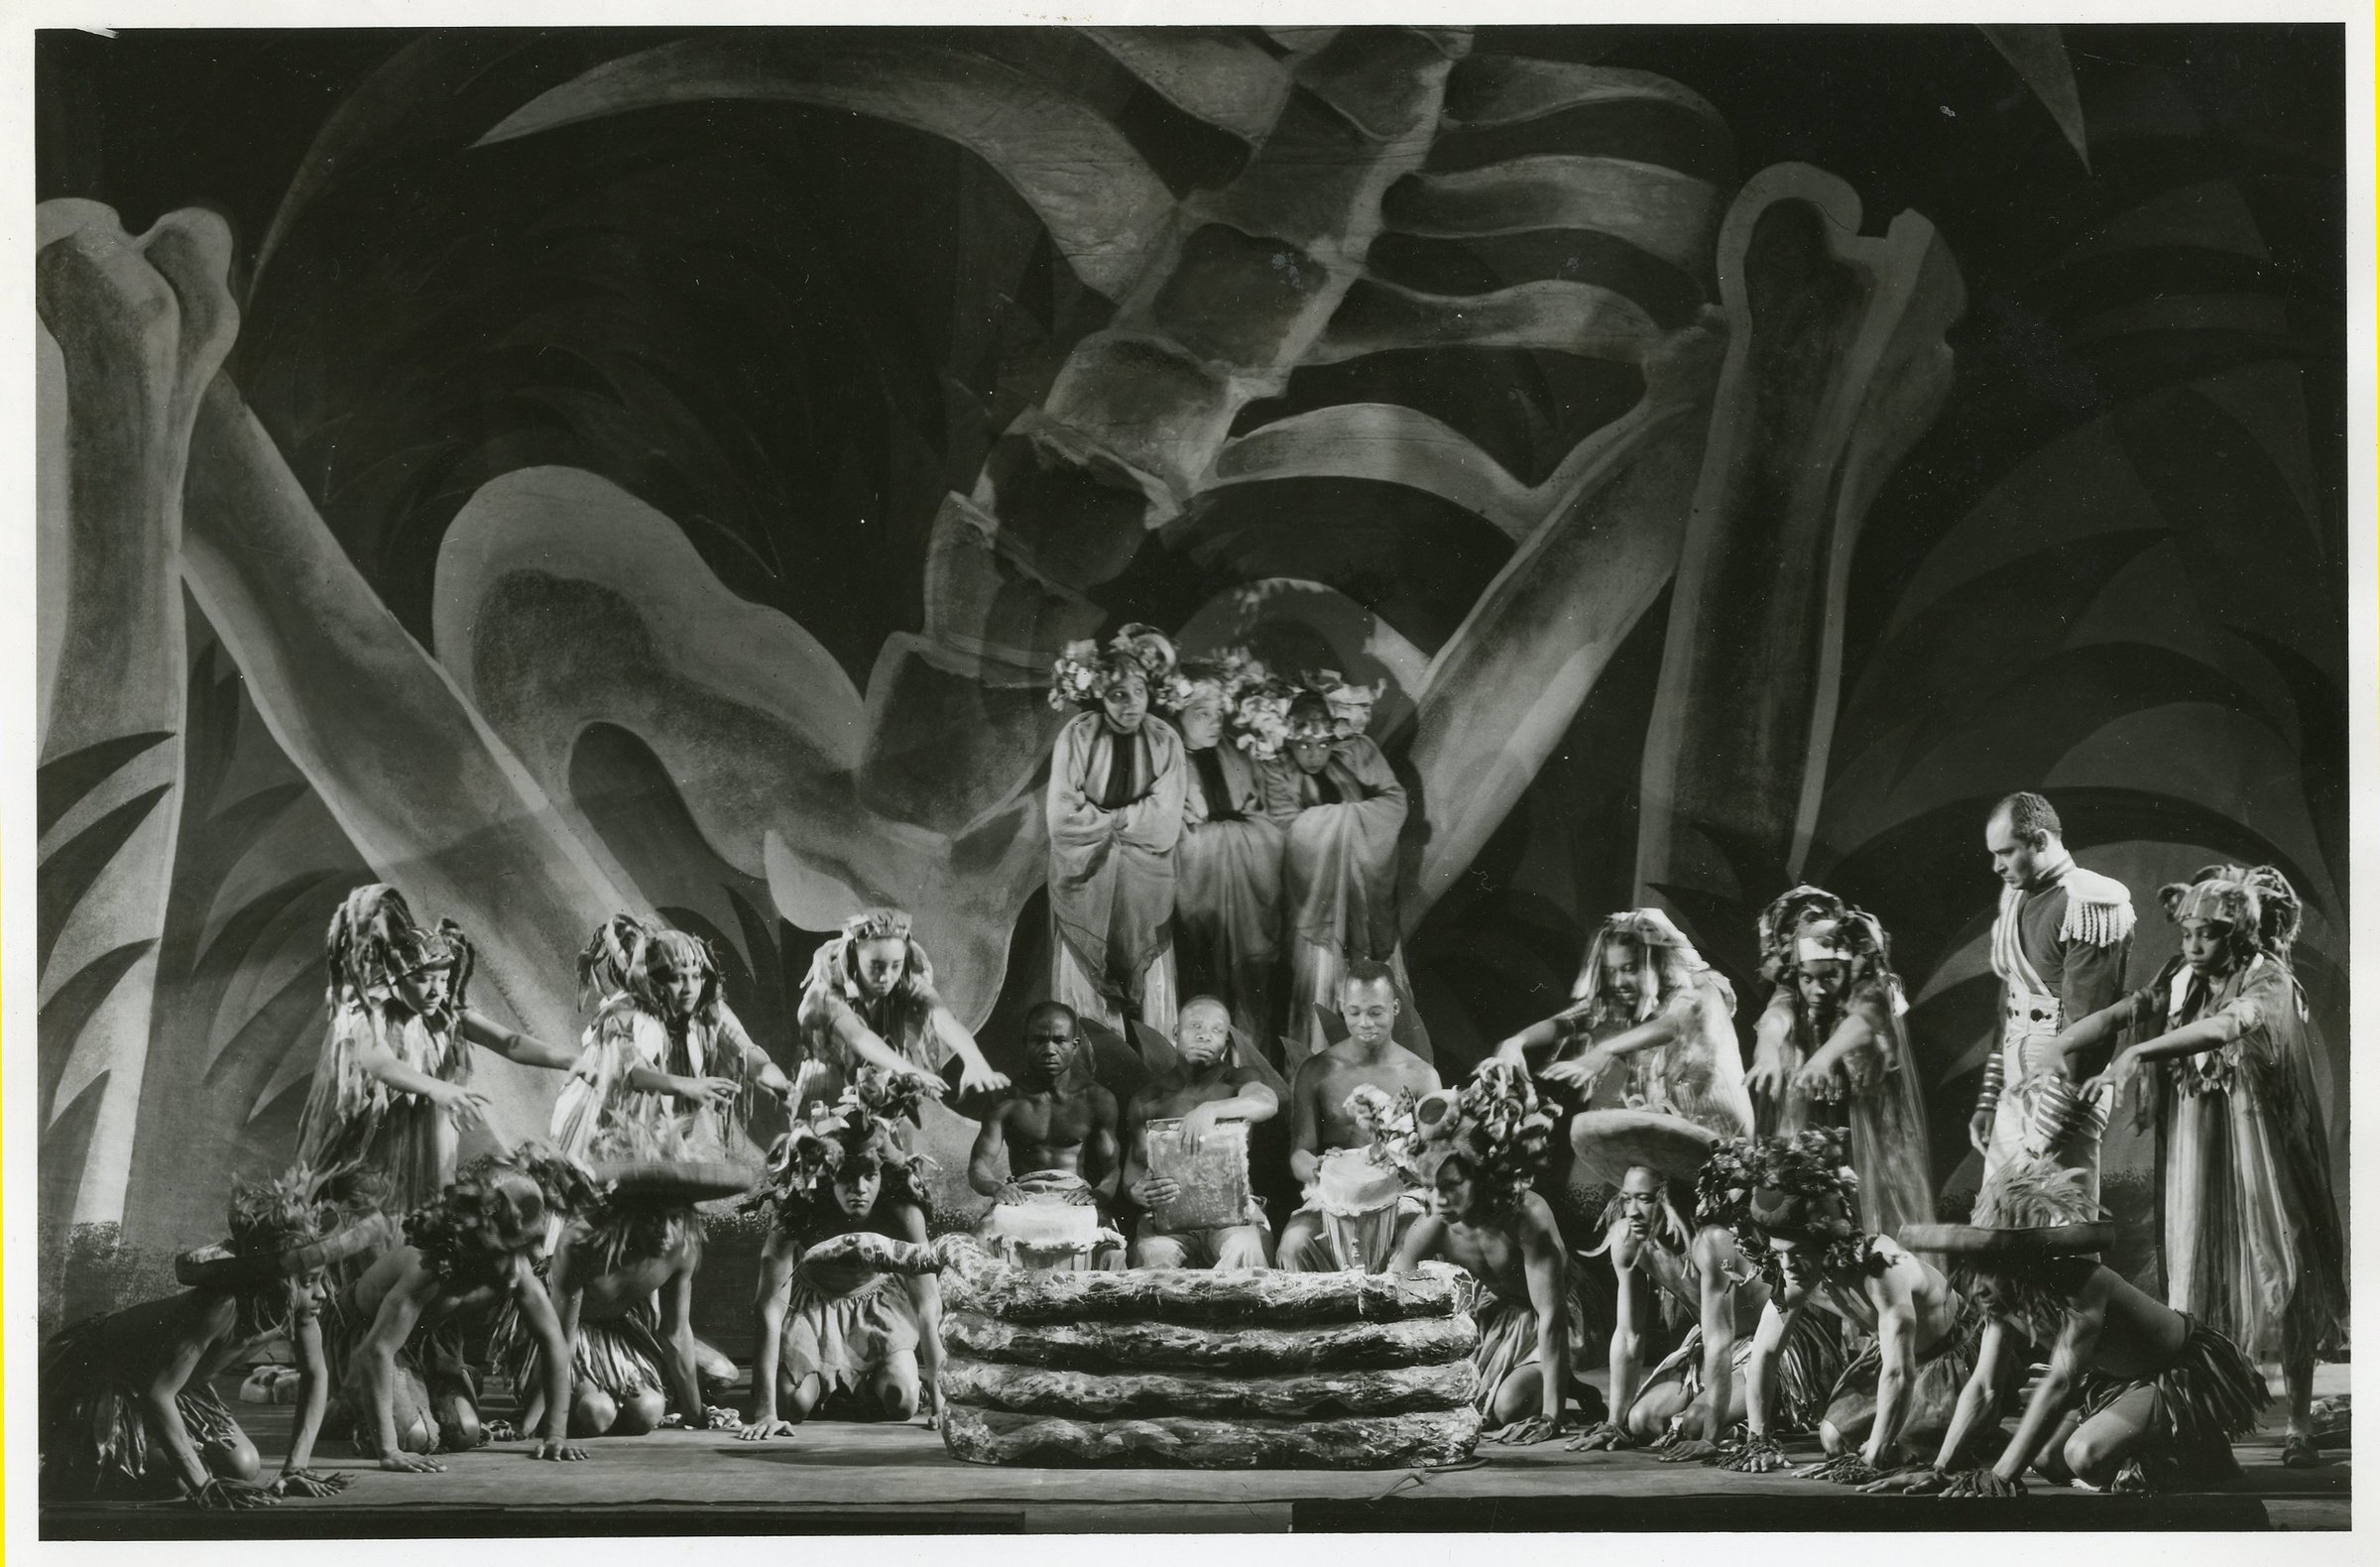 Scene from the Federal Theatre Project production of <em>Macbeth</em>